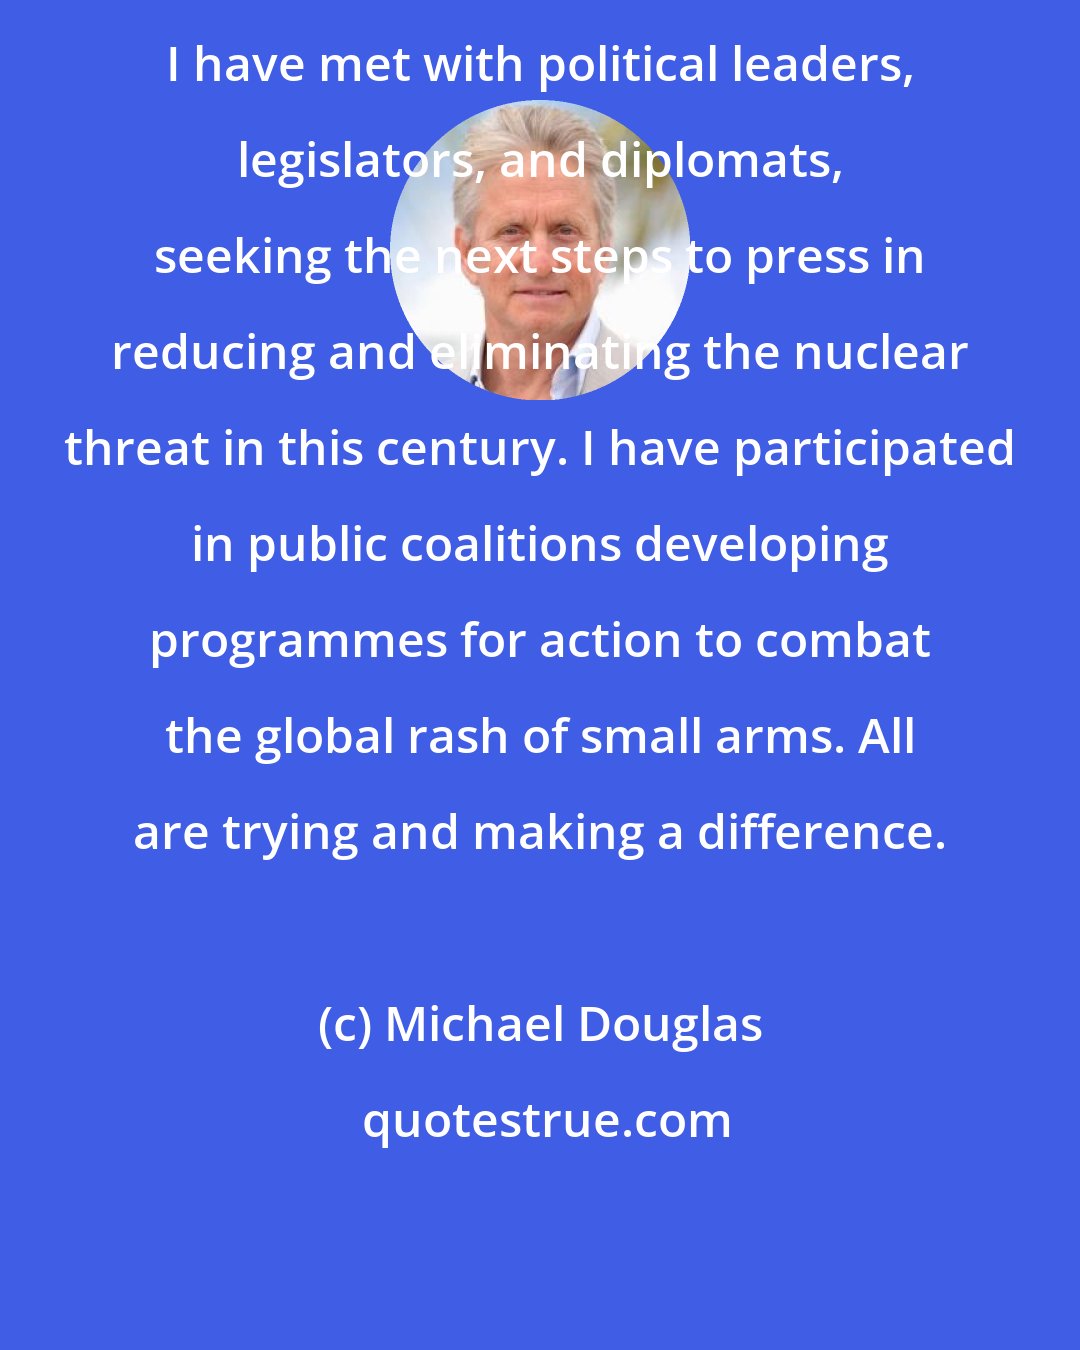 Michael Douglas: I have met with political leaders, legislators, and diplomats, seeking the next steps to press in reducing and eliminating the nuclear threat in this century. I have participated in public coalitions developing programmes for action to combat the global rash of small arms. All are trying and making a difference.